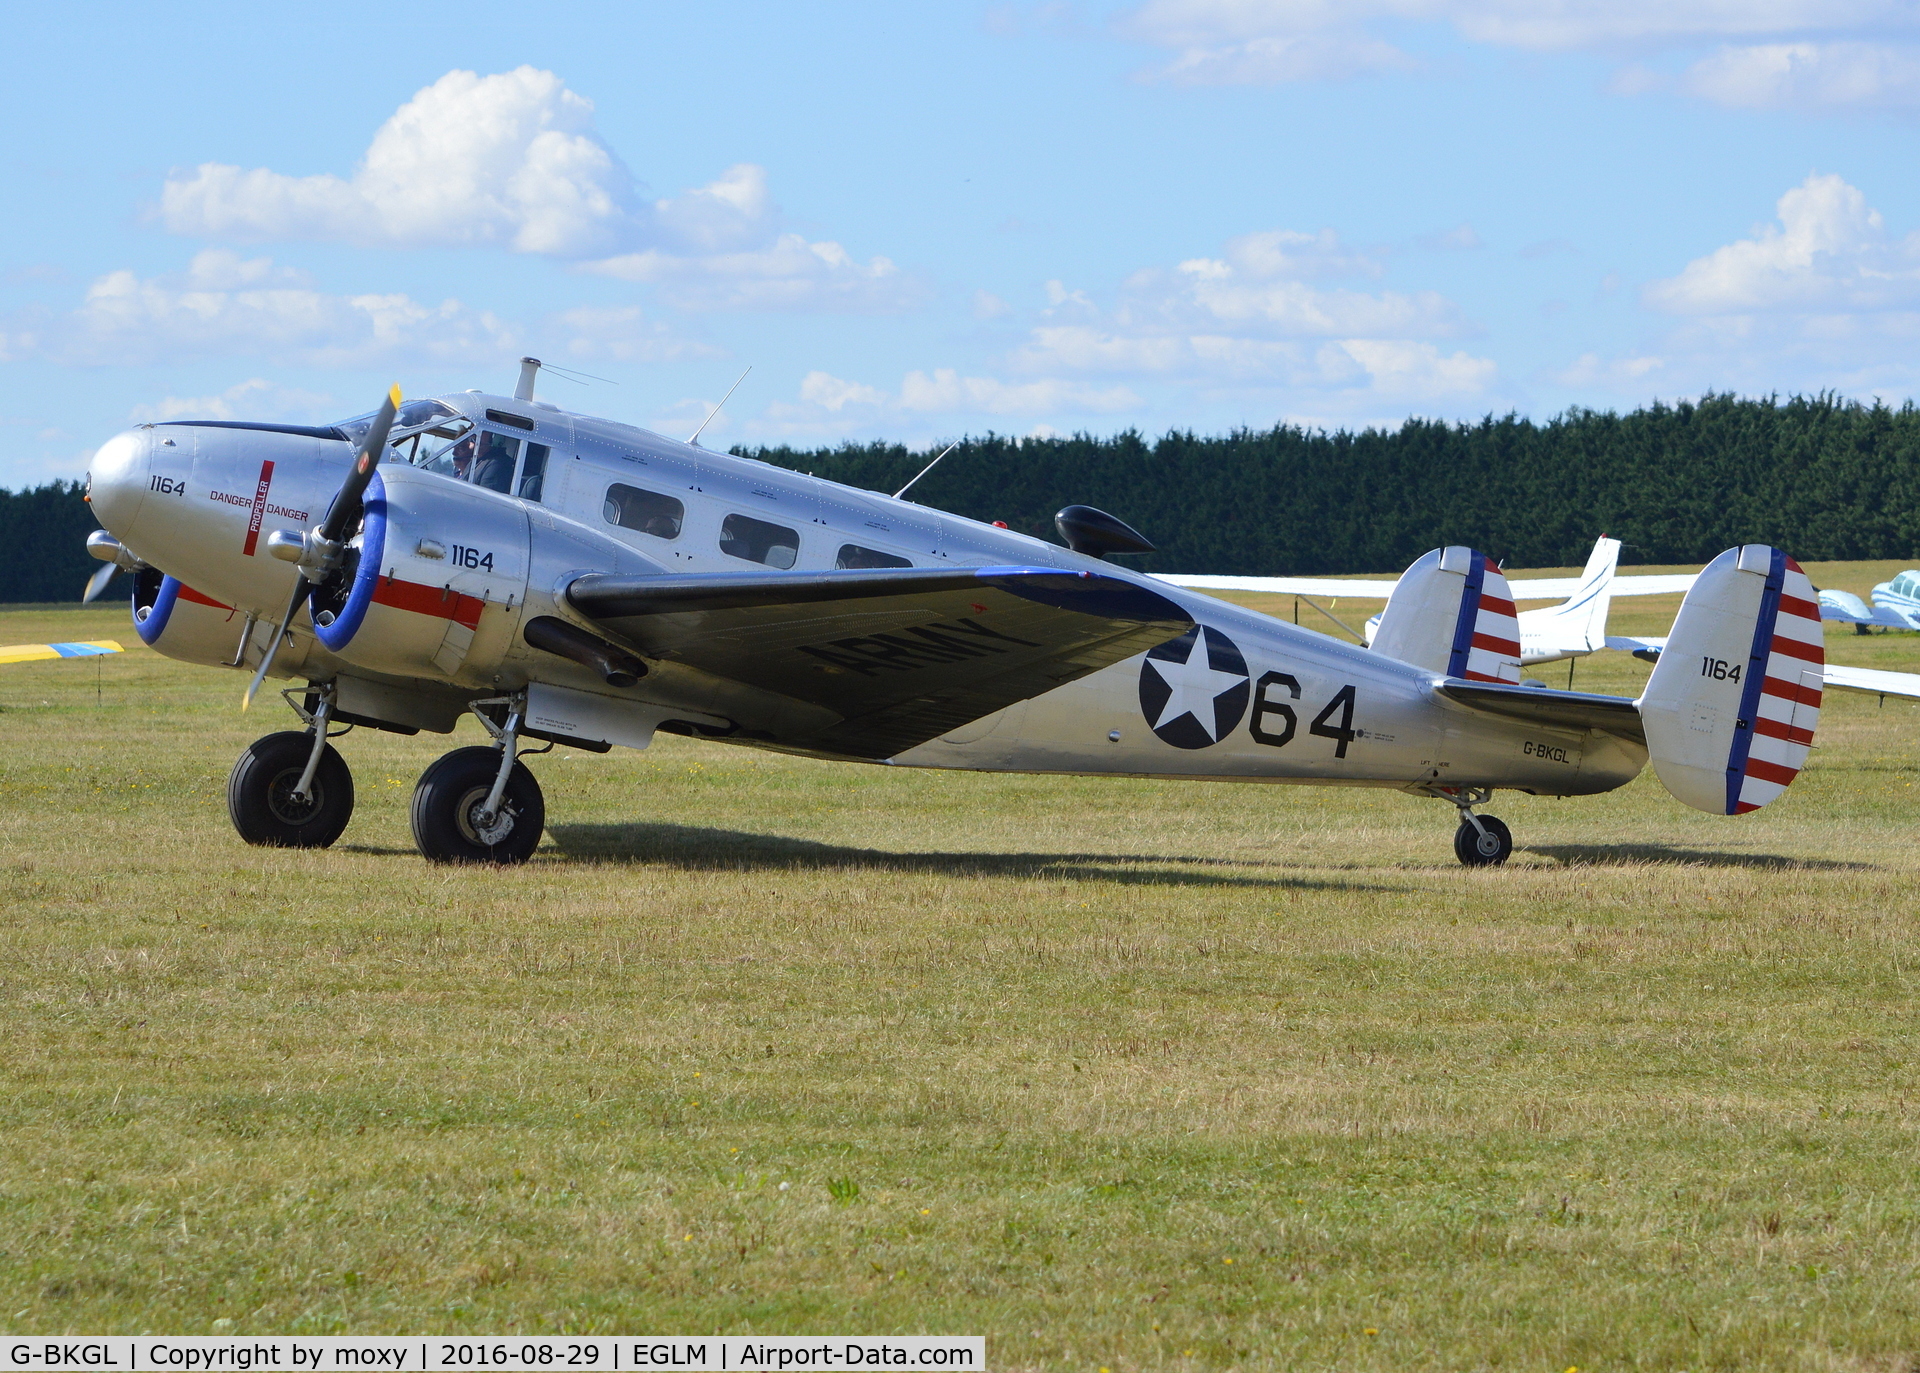 G-BKGL, 1952 Beech Expeditor 3TM C/N CA-164 (A-764), Beech 3TM Expeditor at White Waltham. Ex CF-QPD